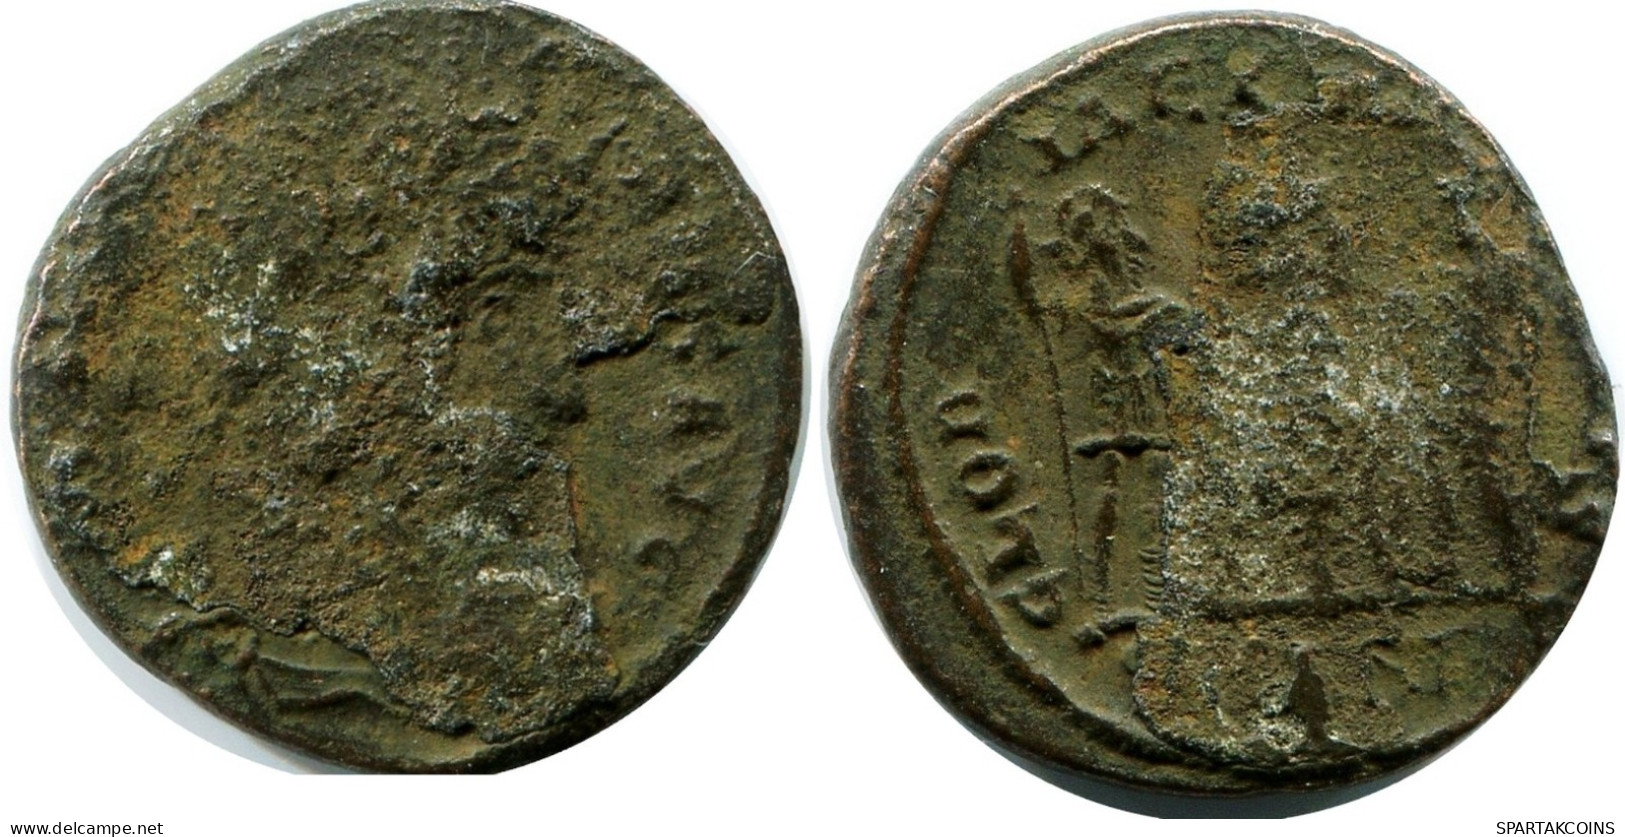 ROMAN Pièce MINTED IN ANTIOCH FROM THE ROYAL ONTARIO MUSEUM #ANC11305.14.F.A - El Imperio Christiano (307 / 363)